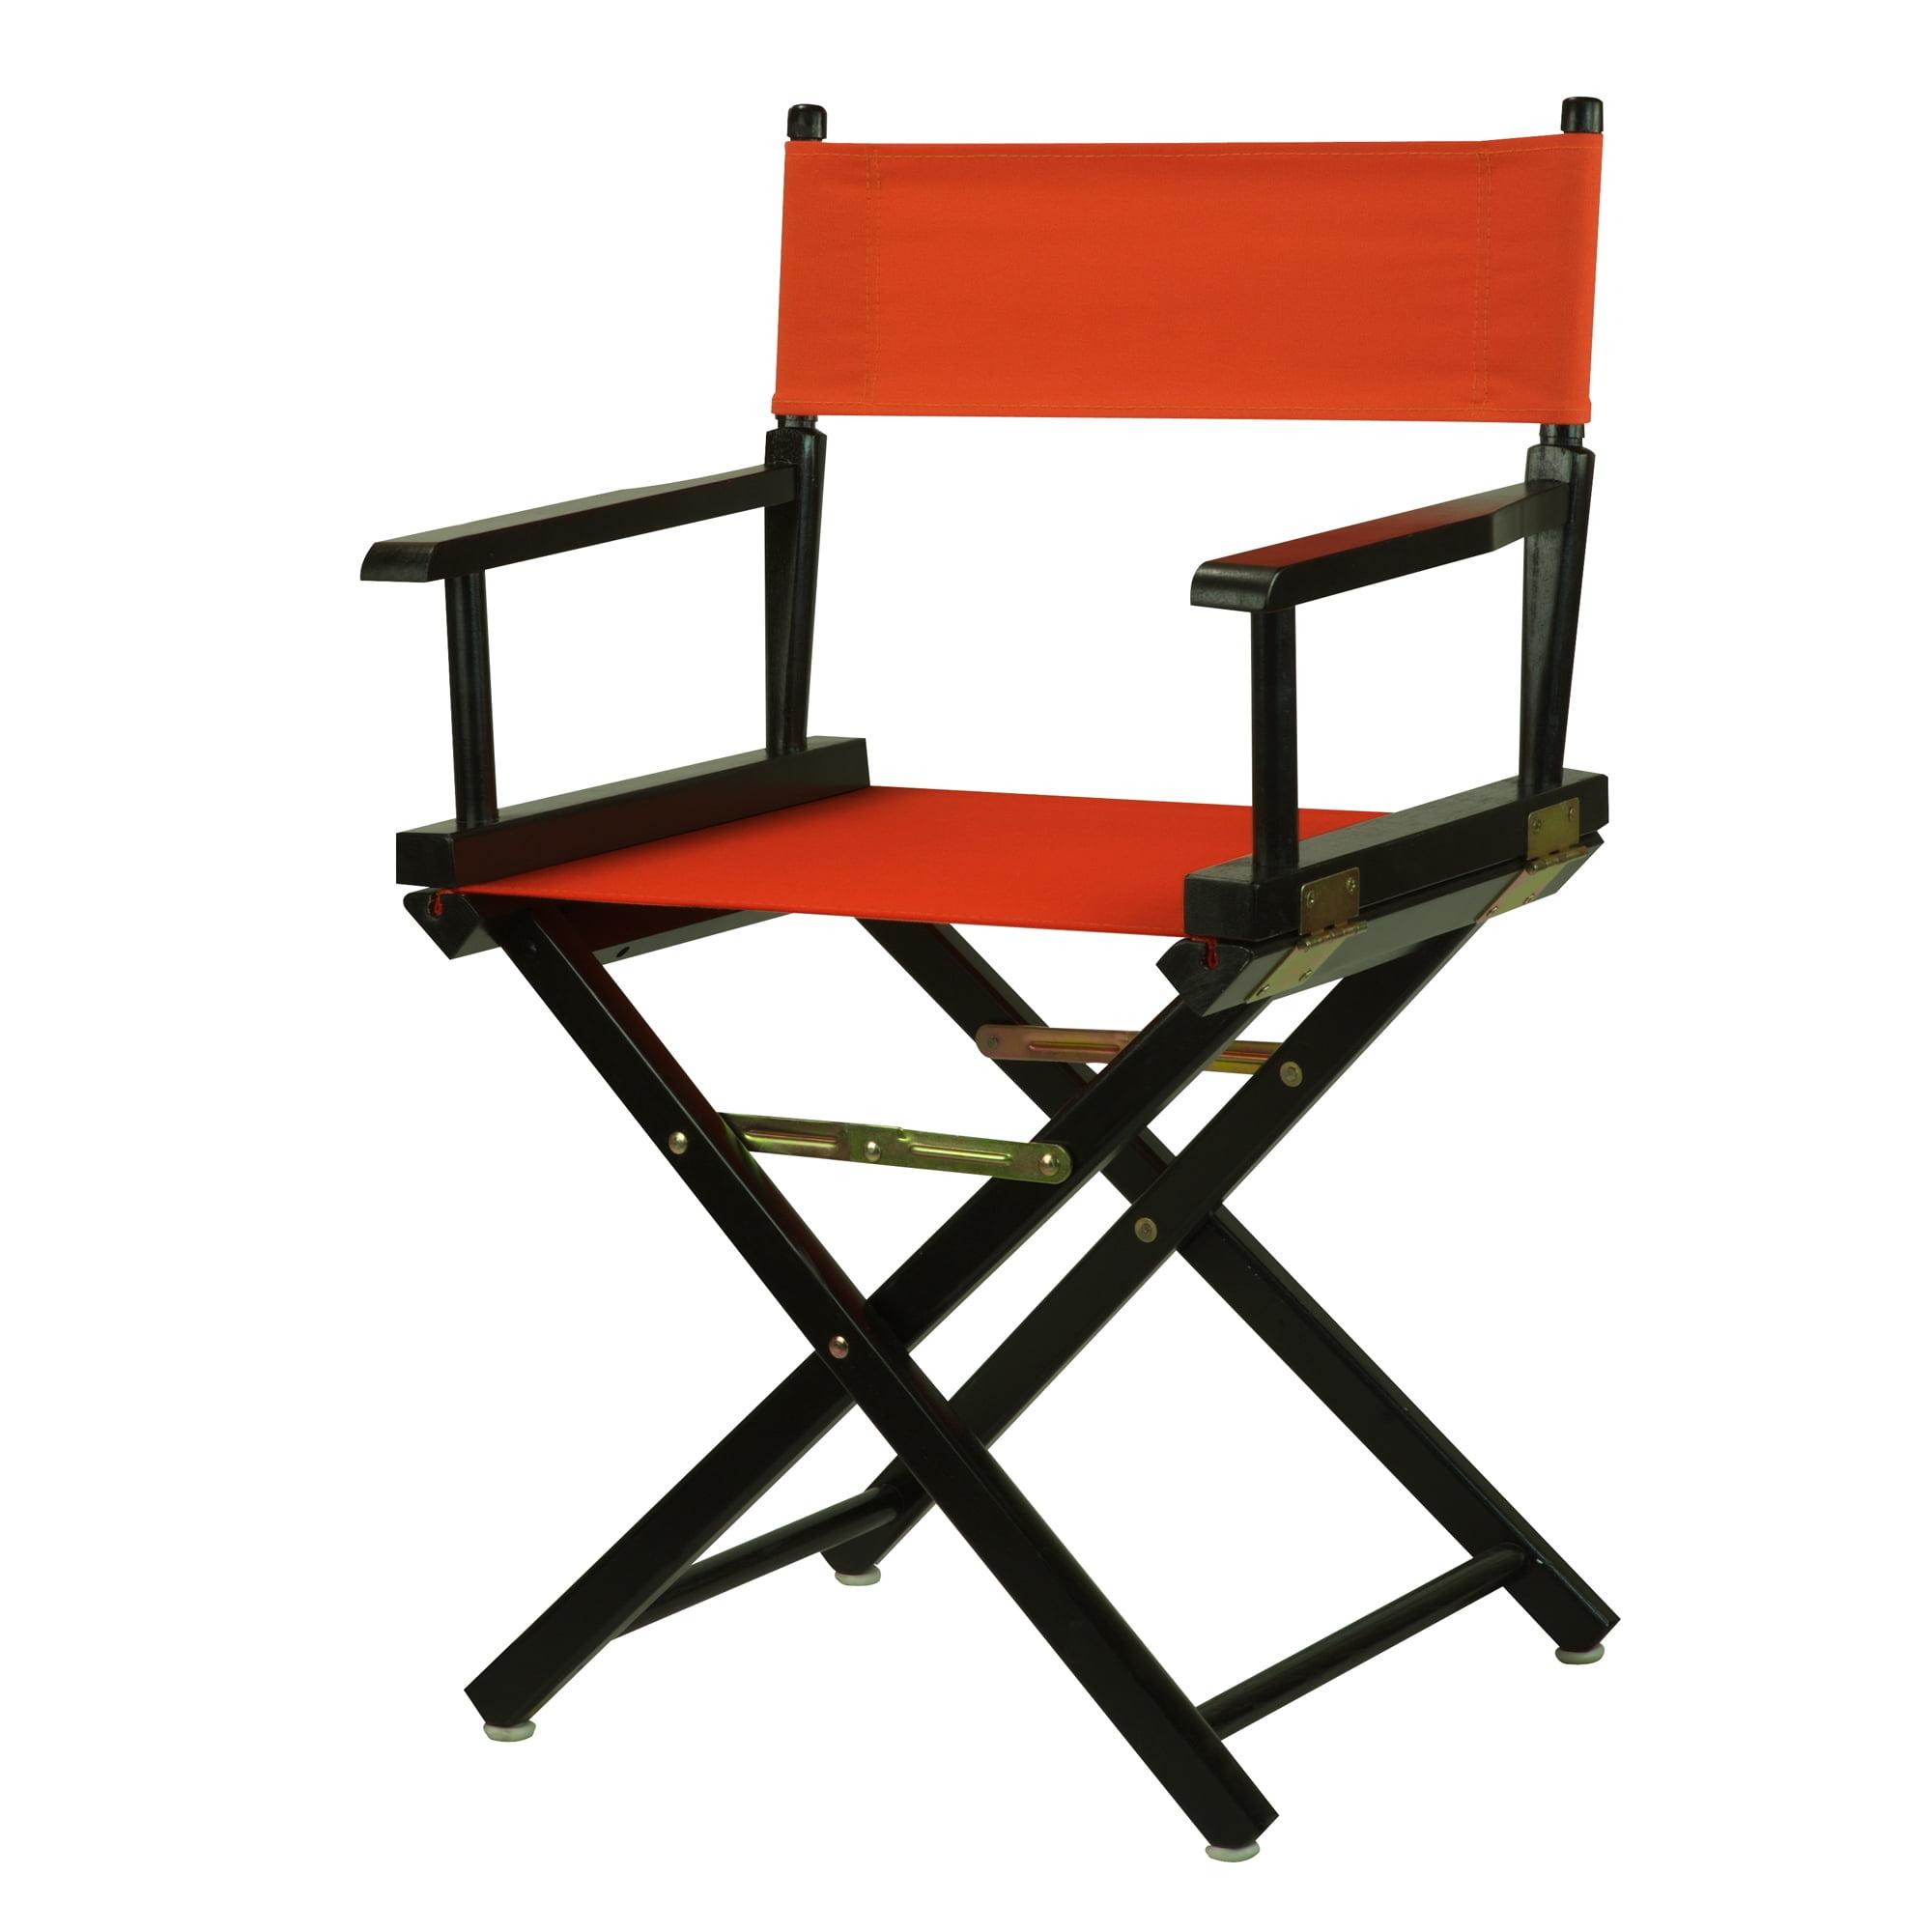 Portable Black Frame Director's Chair with Orange Canvas, 18"